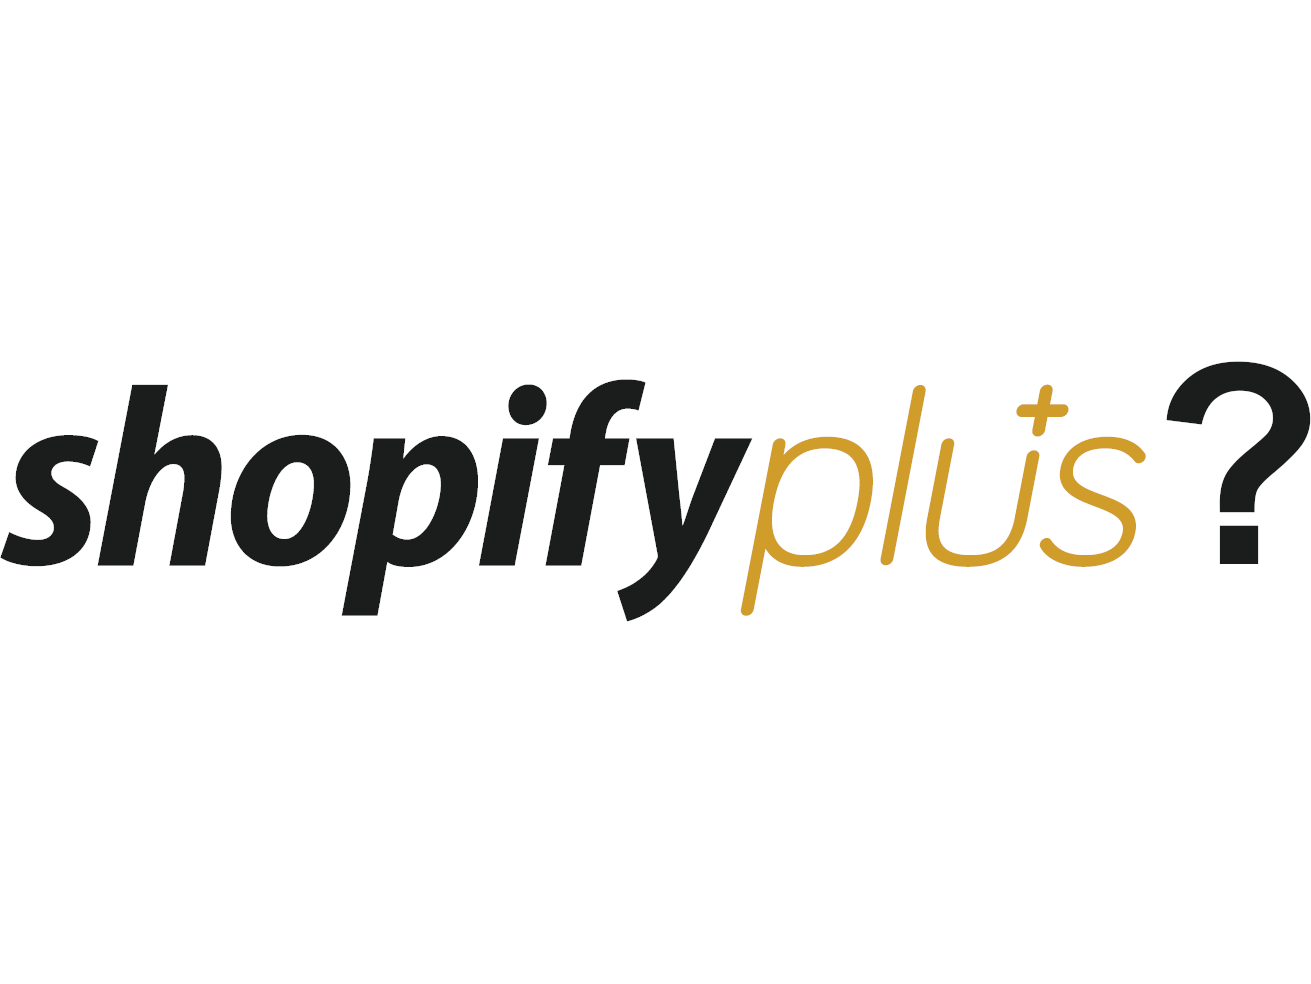 Episode 104 - Should you upgrade to Shopify Plus?